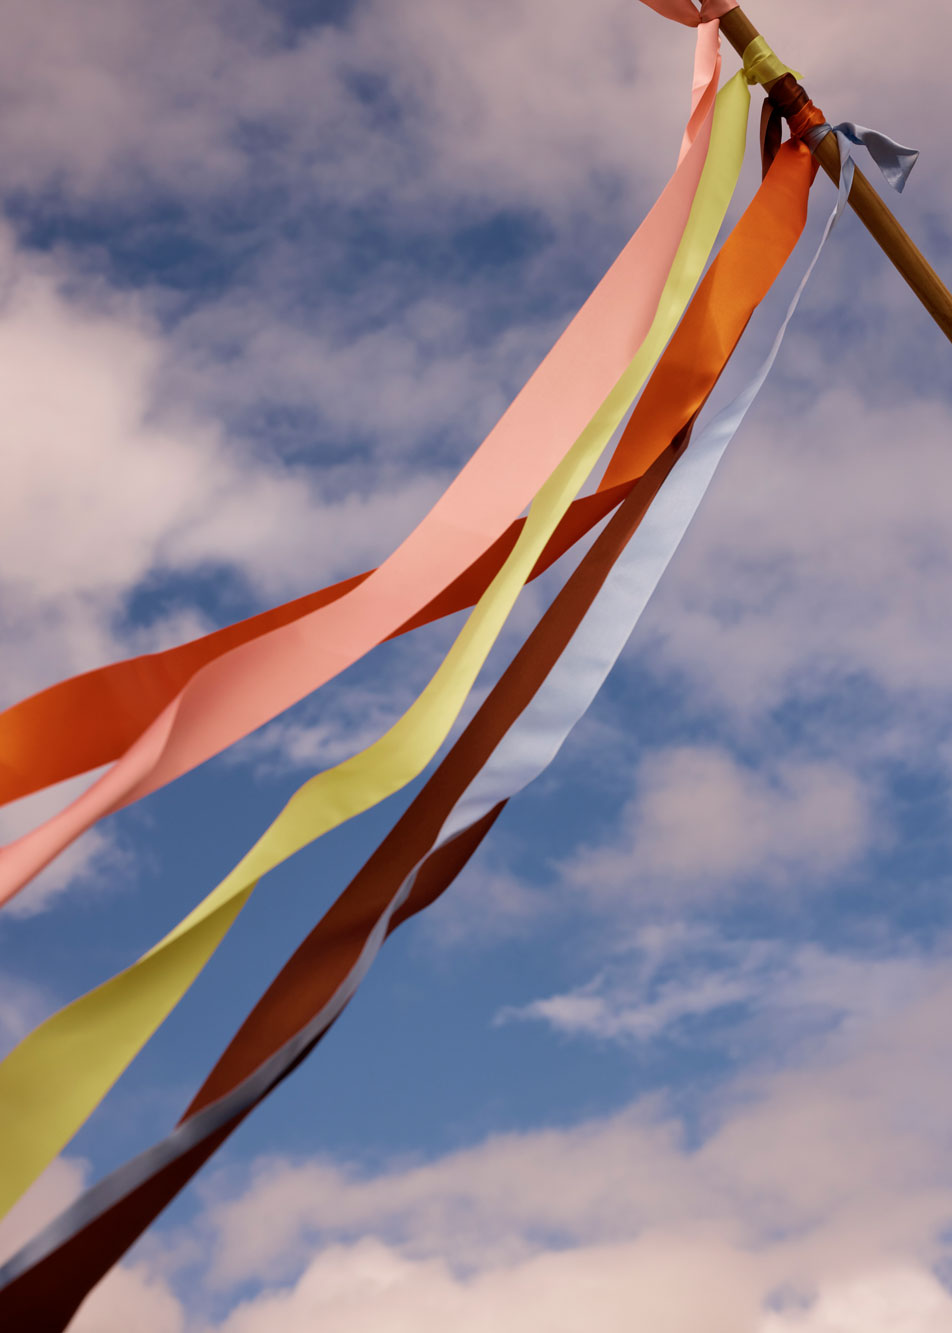 Colourful ribbons tied to a pole, blowing in the air with the sky in the background